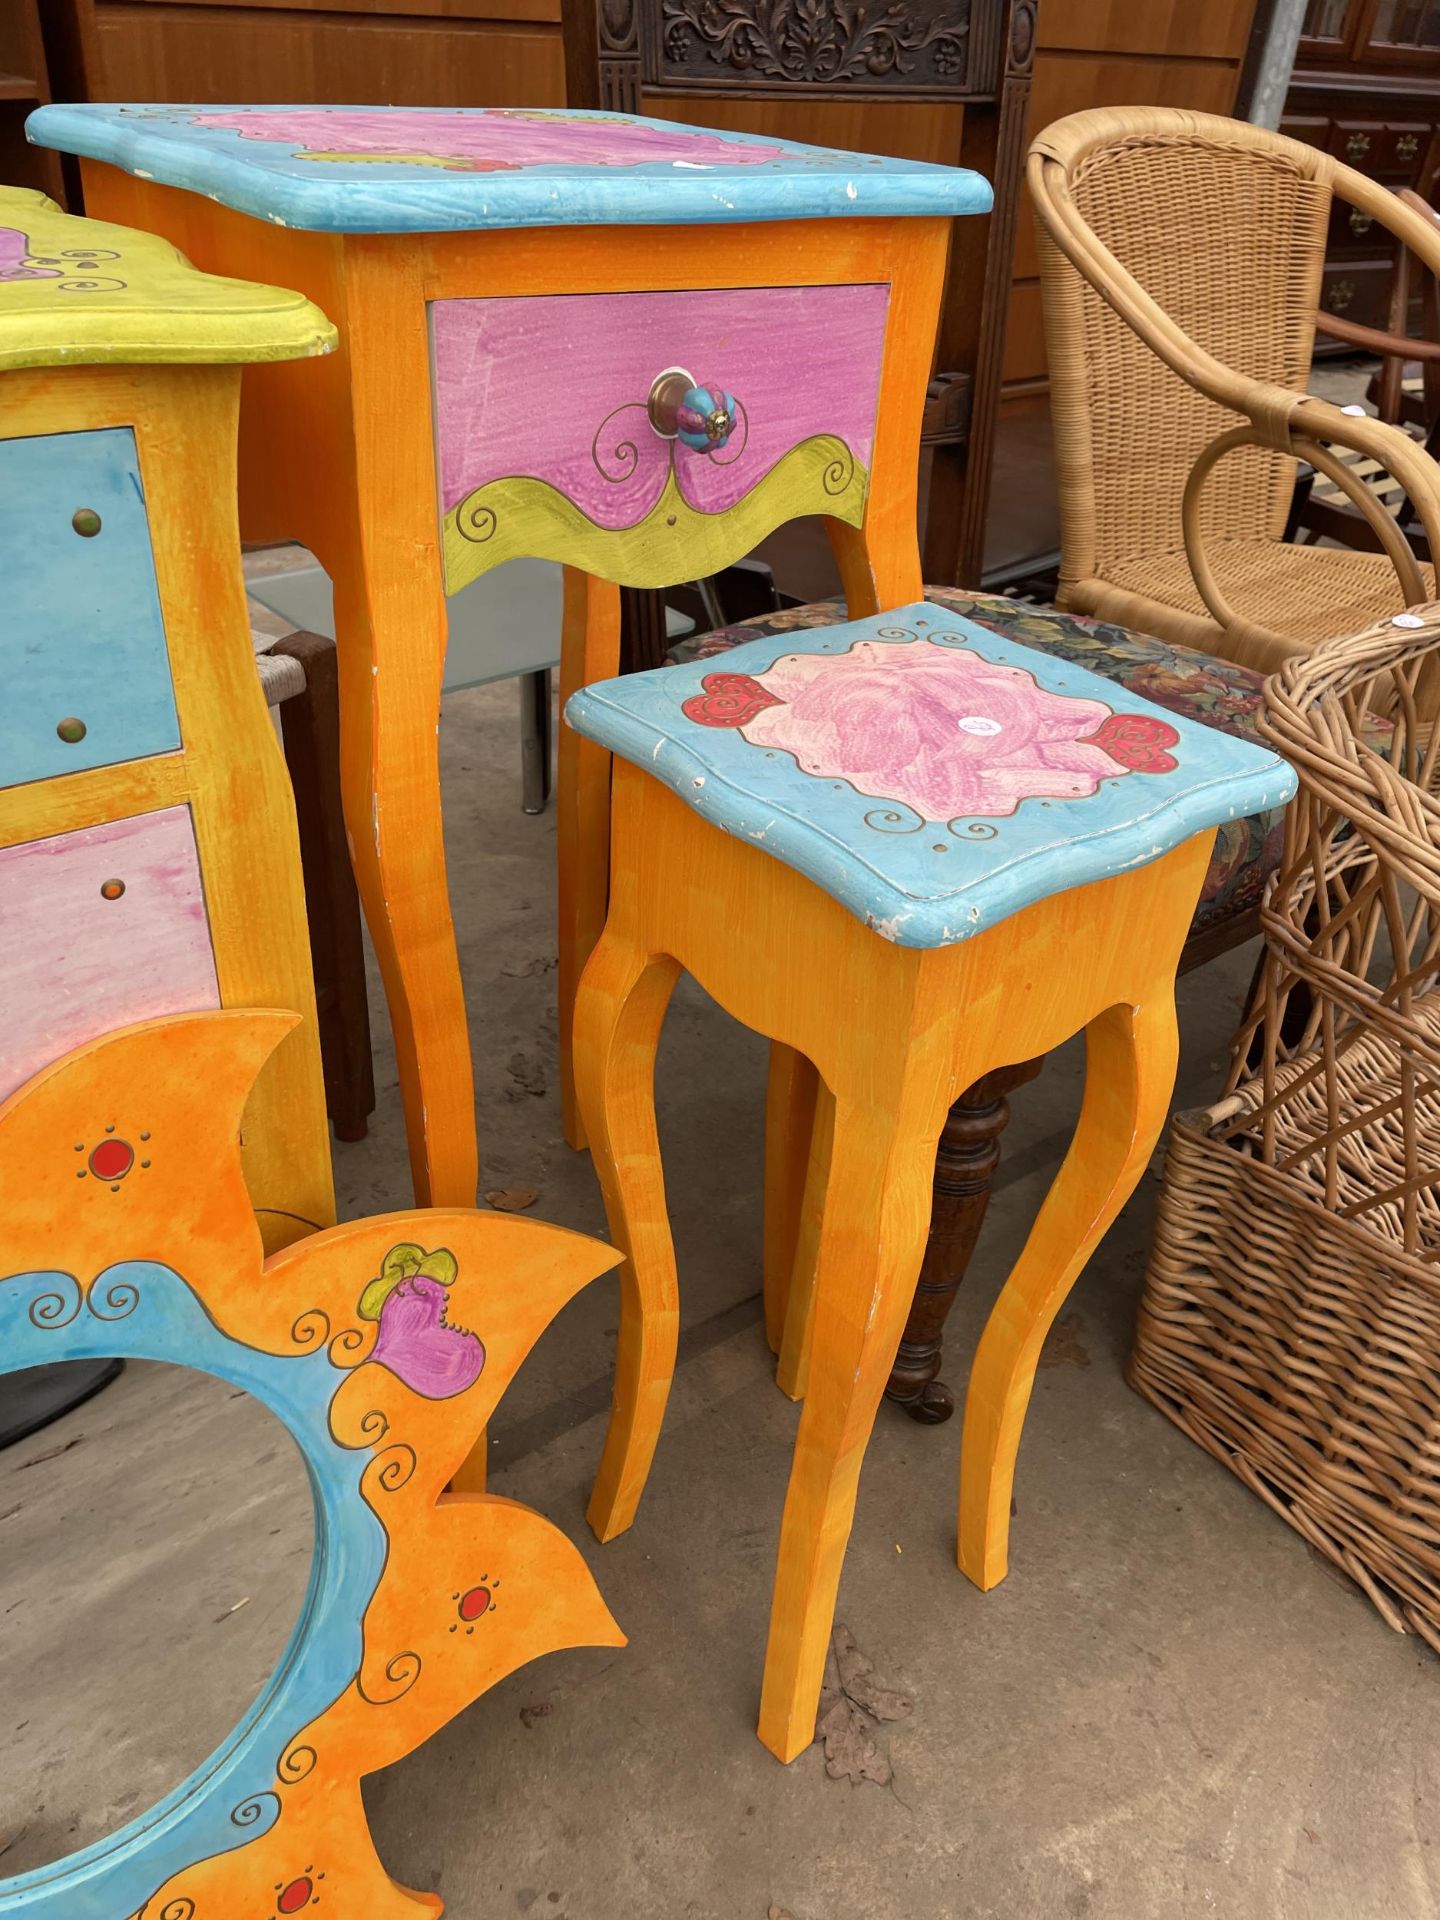 A RANGE OF BRIGHTLY PAINTED BEDTOOM FURNITURE, 3 CHESTS, MIRROR, CUPBOARDS AND SMALL TABLE - Image 5 of 6